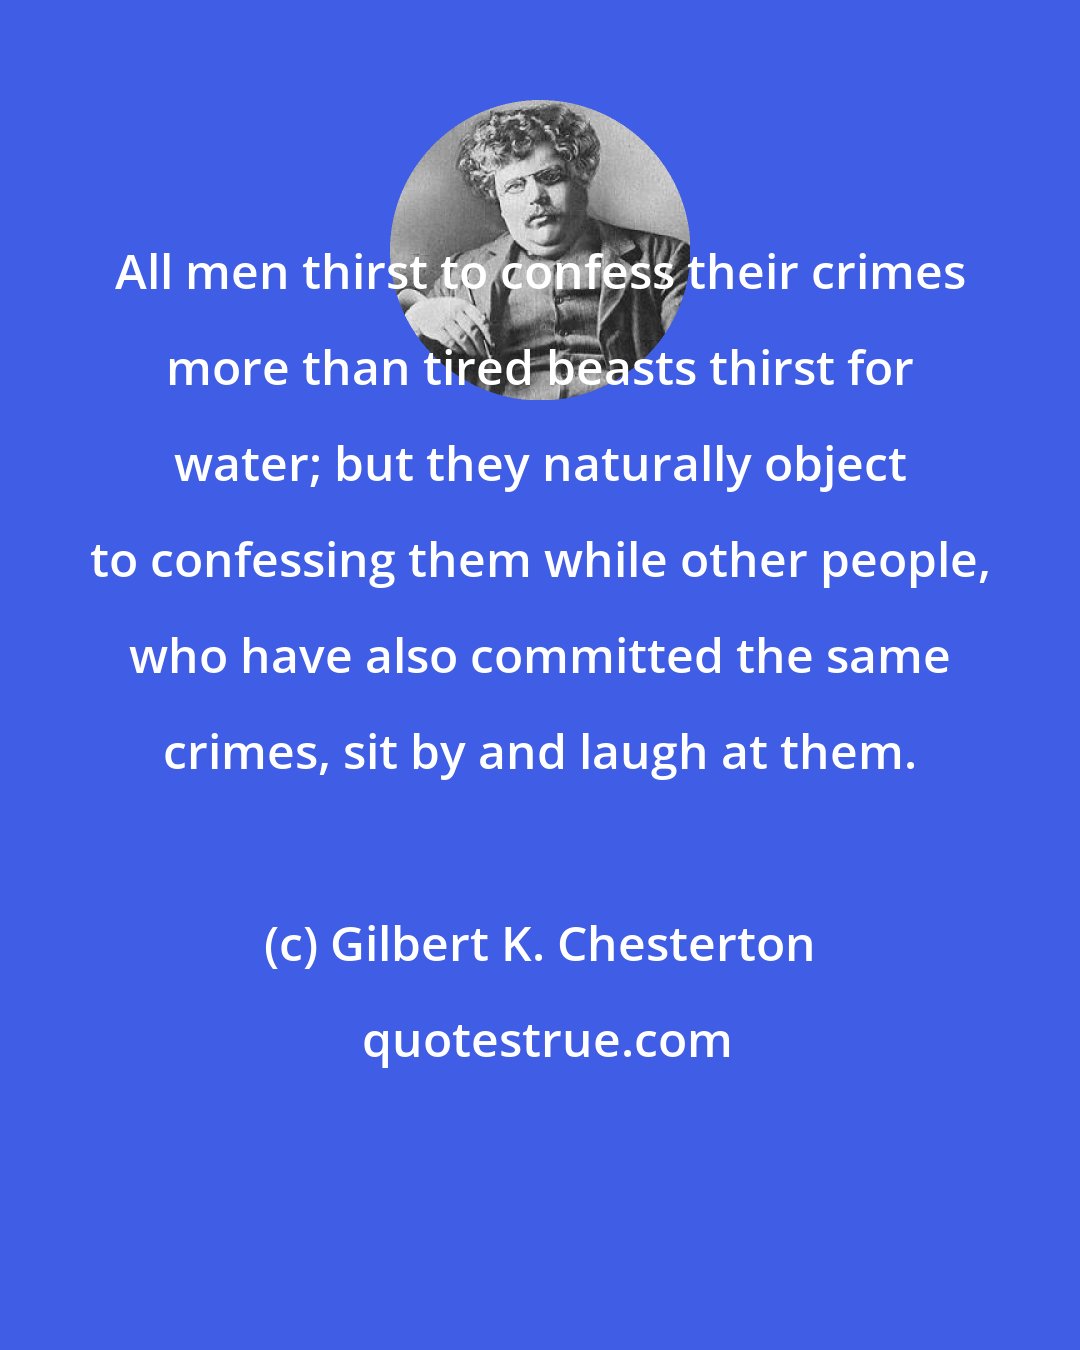 Gilbert K. Chesterton: All men thirst to confess their crimes more than tired beasts thirst for water; but they naturally object to confessing them while other people, who have also committed the same crimes, sit by and laugh at them.